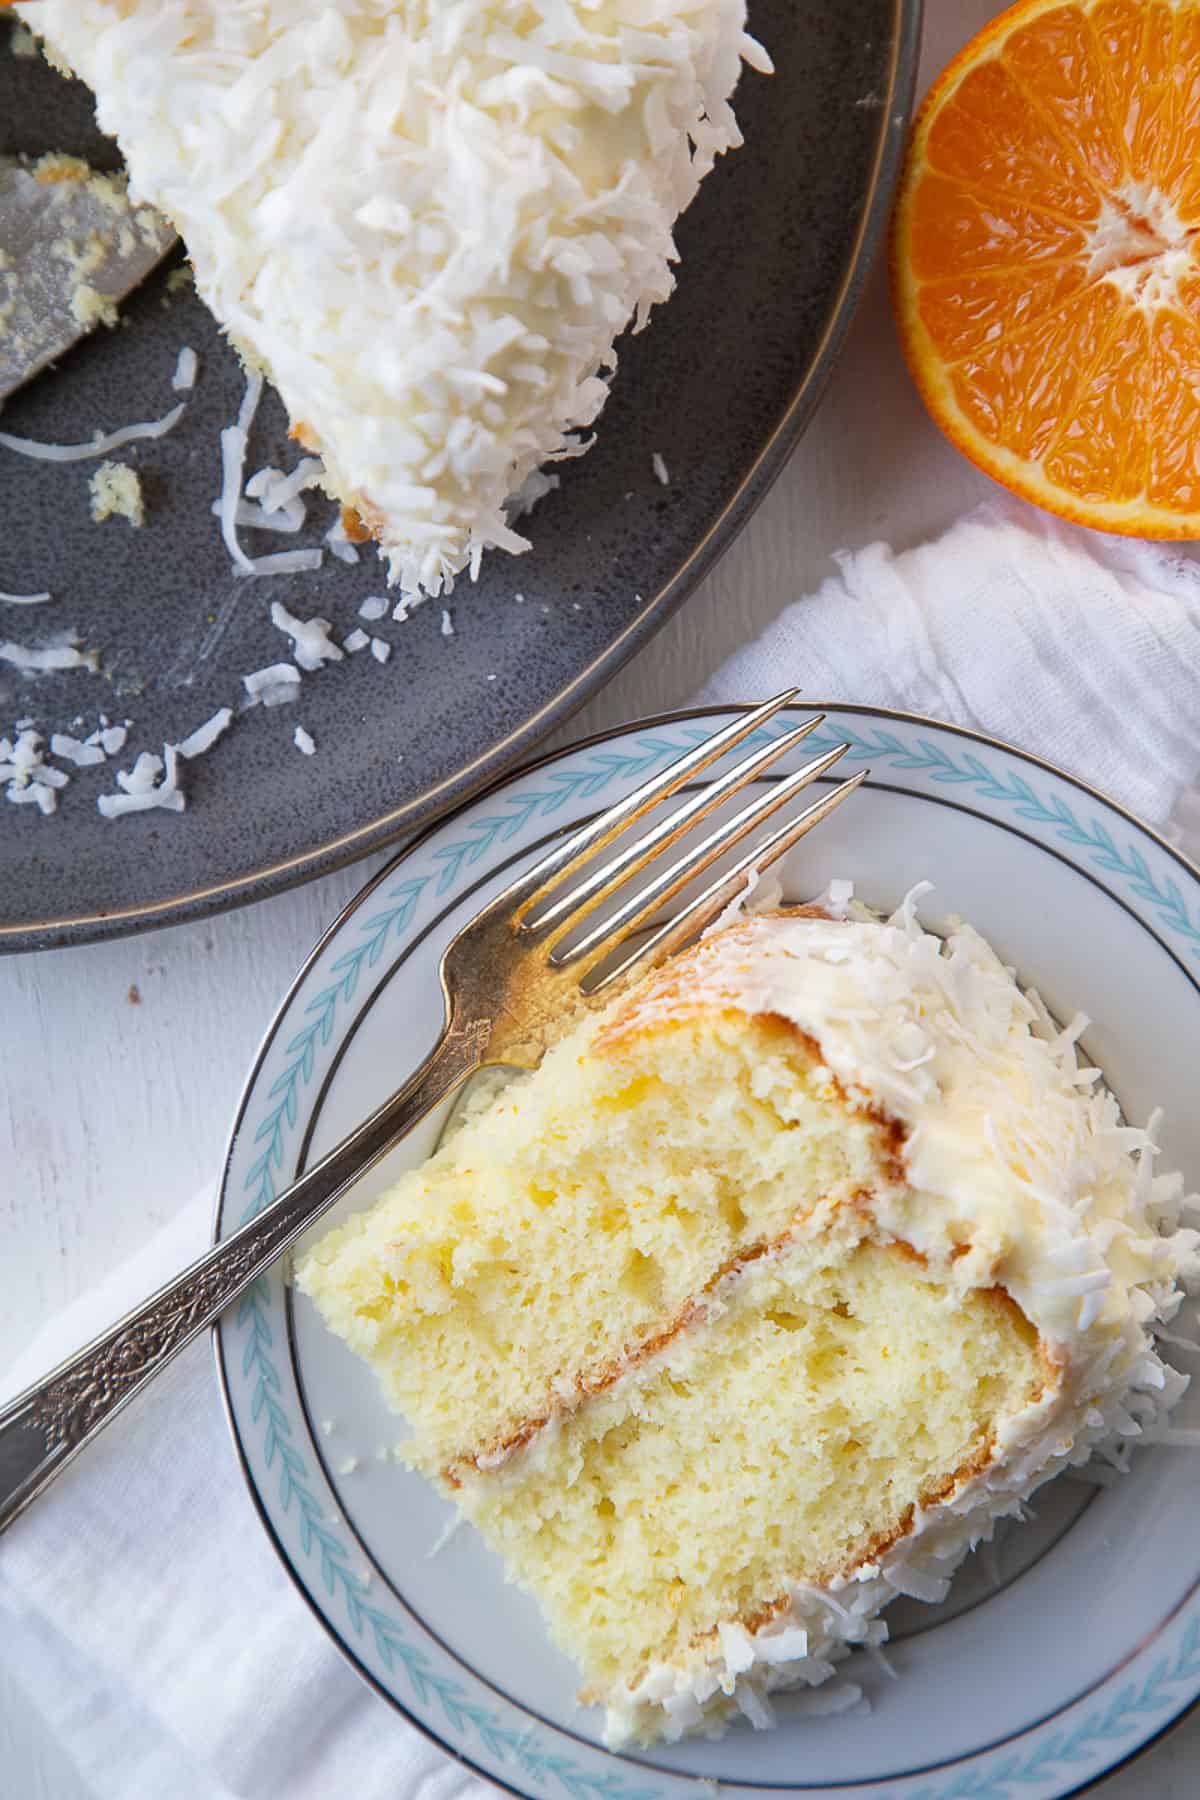 slice of orange layer cake with coconut frosting on a plate next to a whole cake.